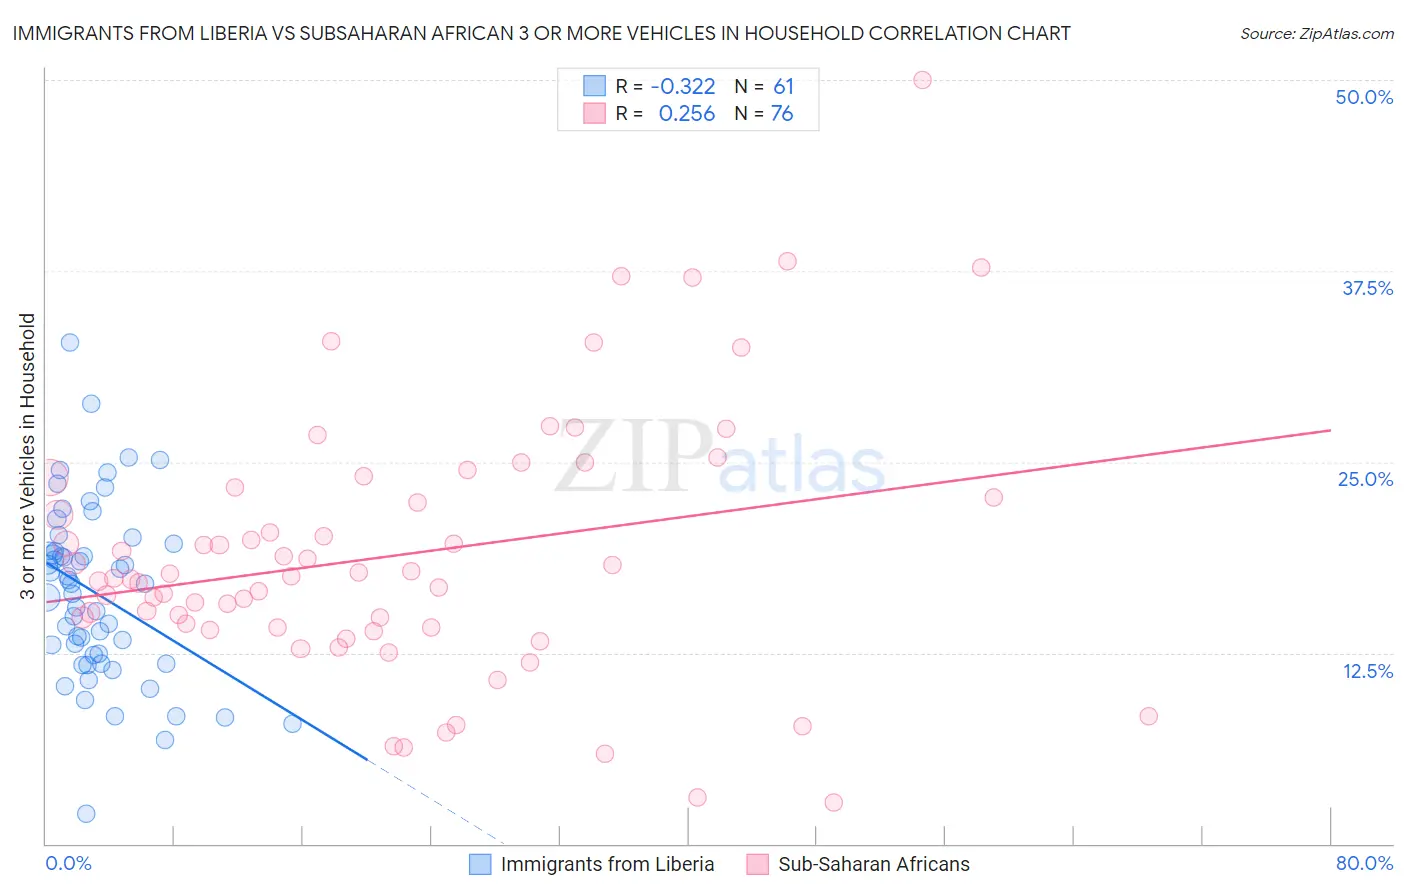 Immigrants from Liberia vs Subsaharan African 3 or more Vehicles in Household